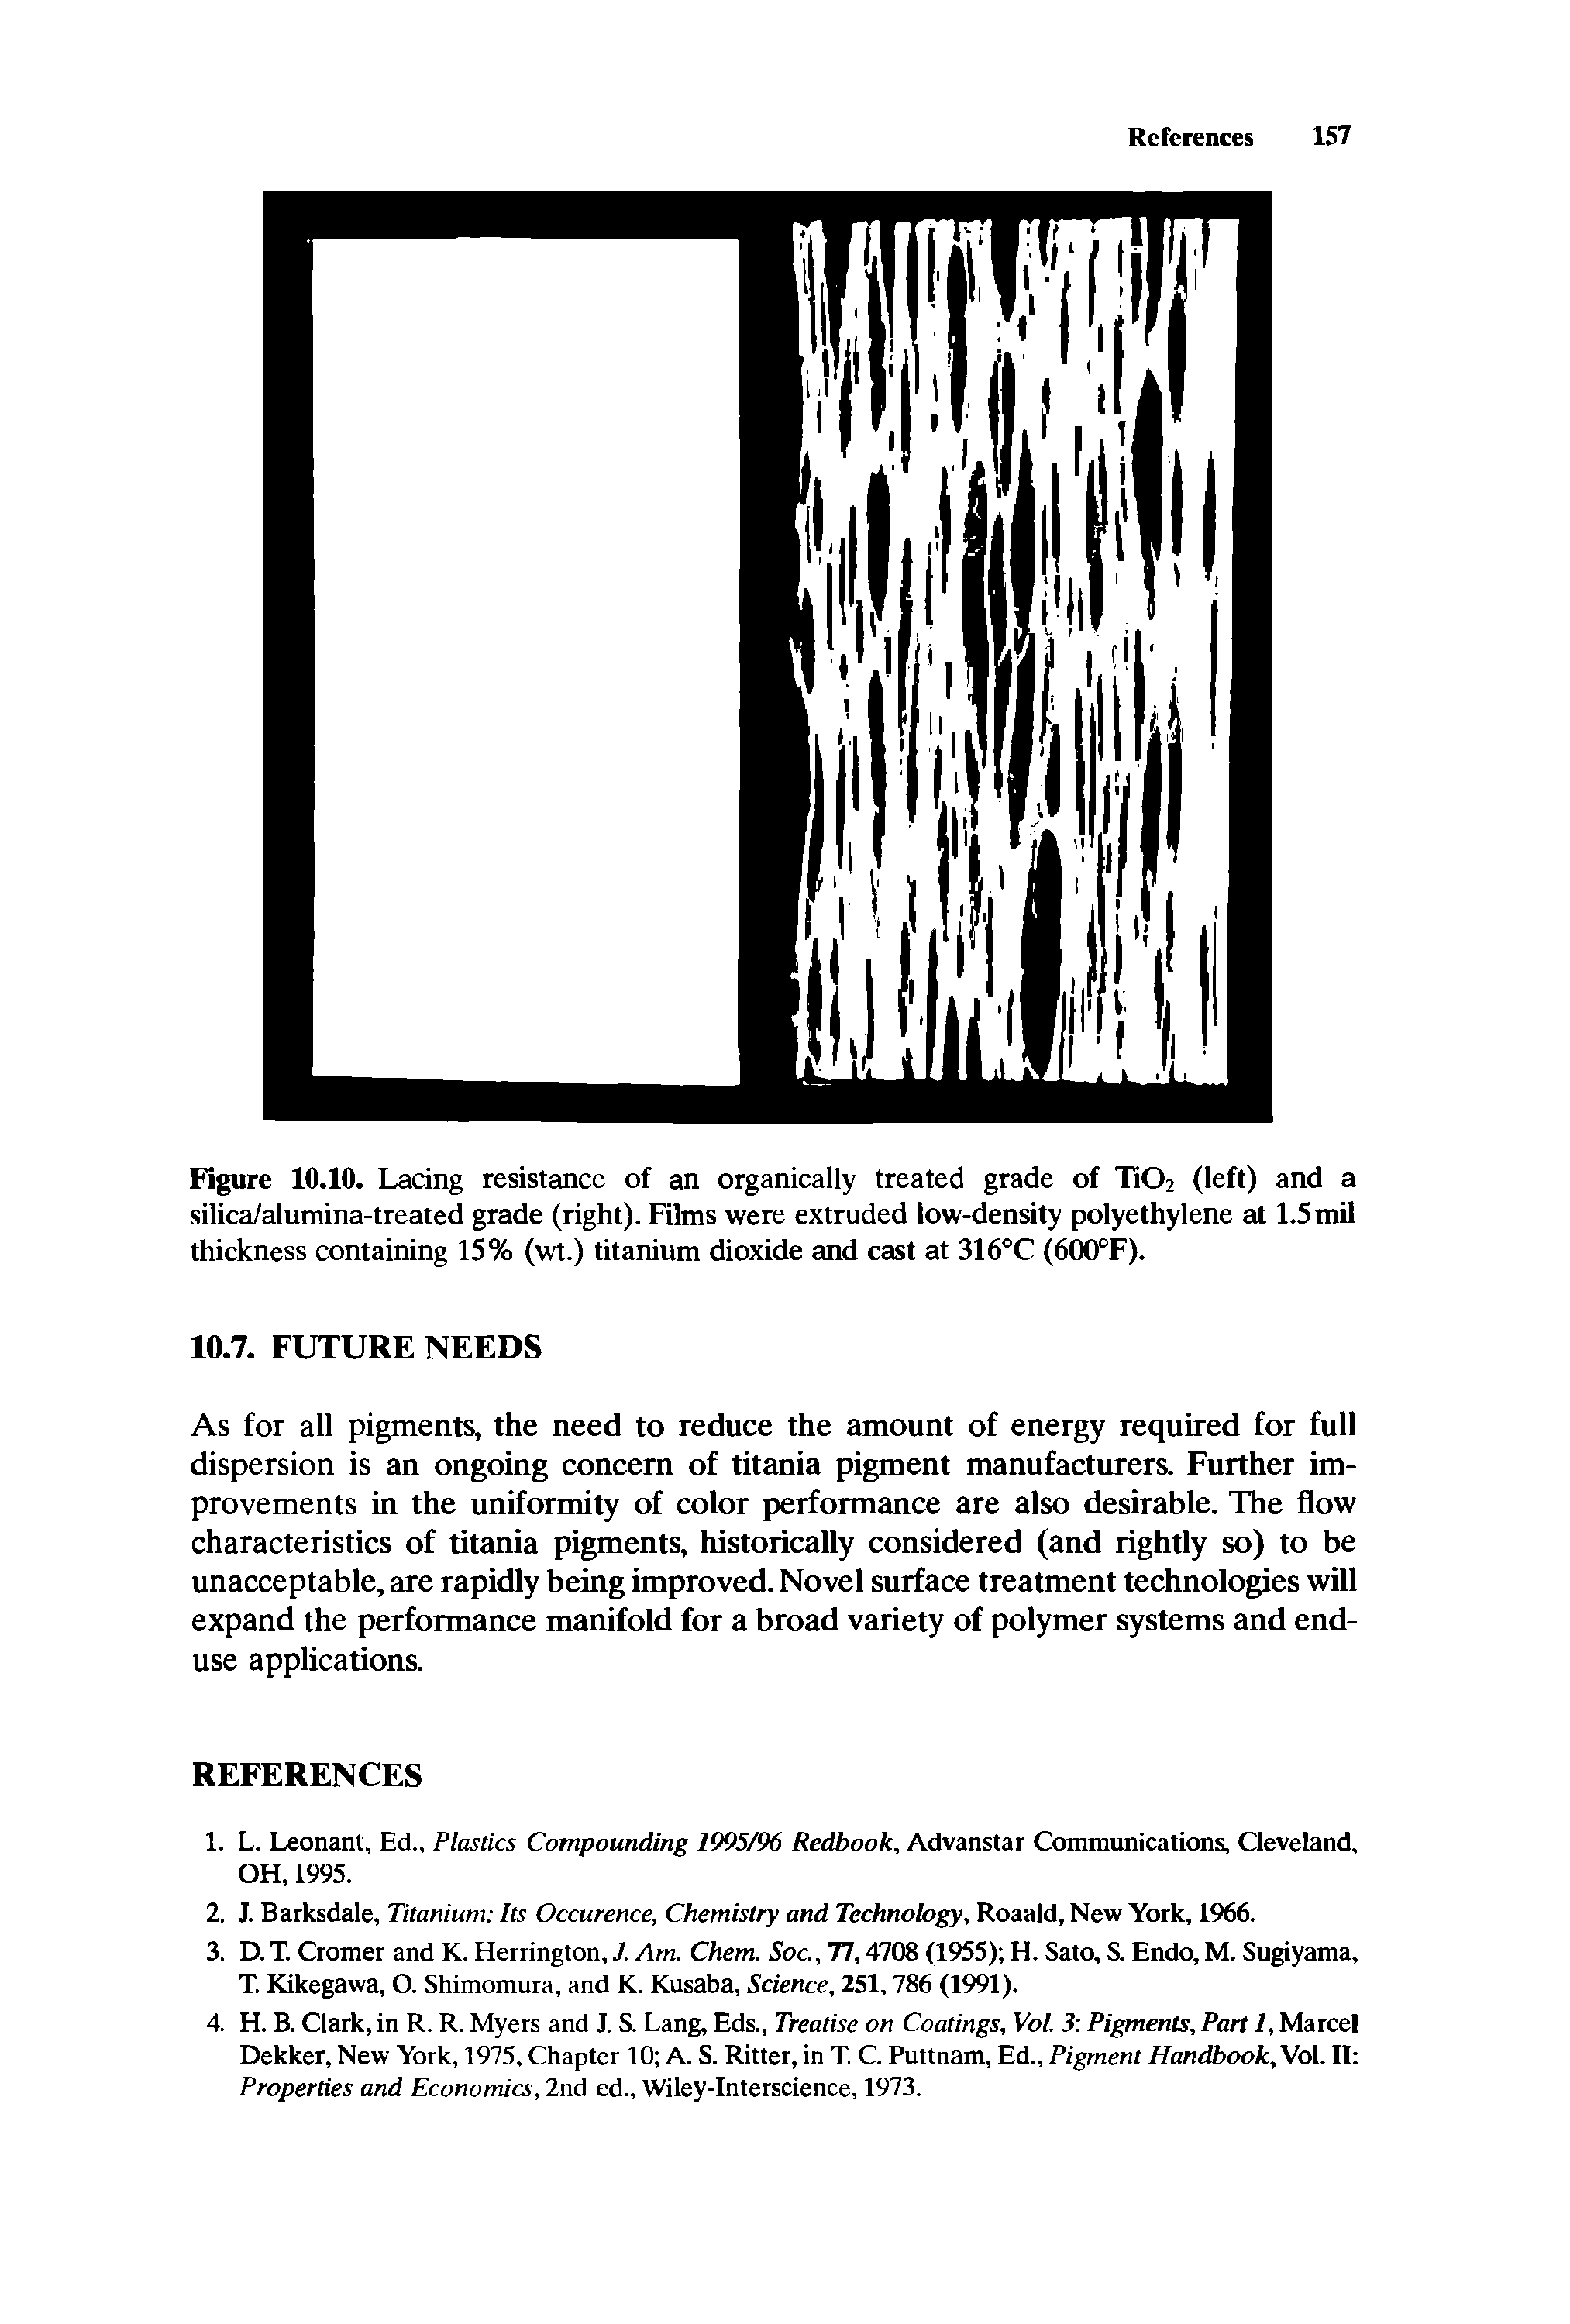 Figure 10.10. Lacing resistance of an organically treated grade of Ti02 (left) and a silica/alumina-treated grade (right). Films were extruded low-density polyethylene at 1.5 mil thickness containing 15% (wt.) titanium dioxide and cast at 316°C (600°F).